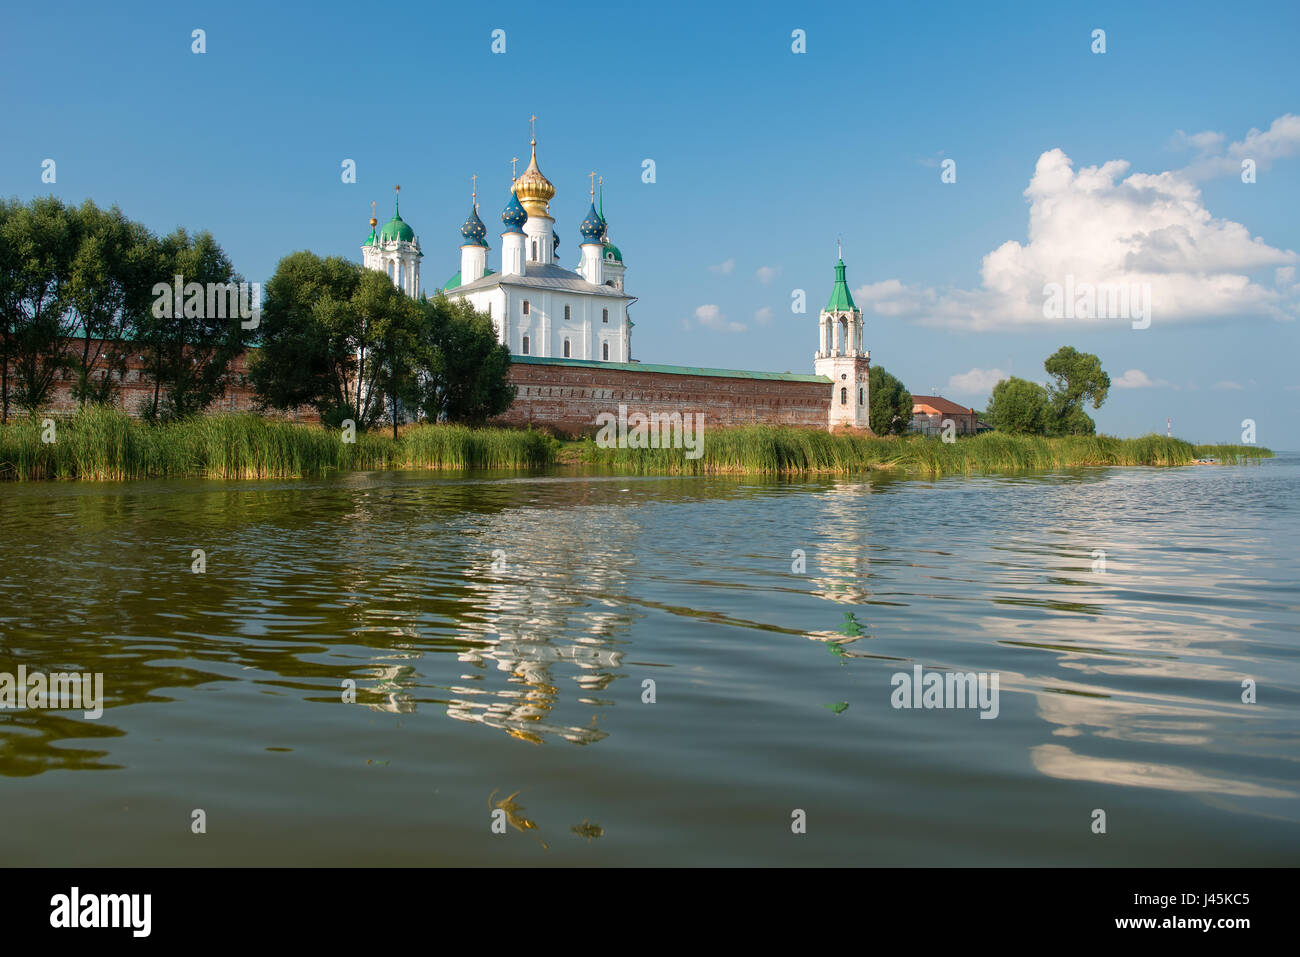 Rostov the Great, Spaso-Yakovlevsky Dmitriev monastery, The Cathedral Of The Conception Of Anne. Summer view from the Nero lake Stock Photo